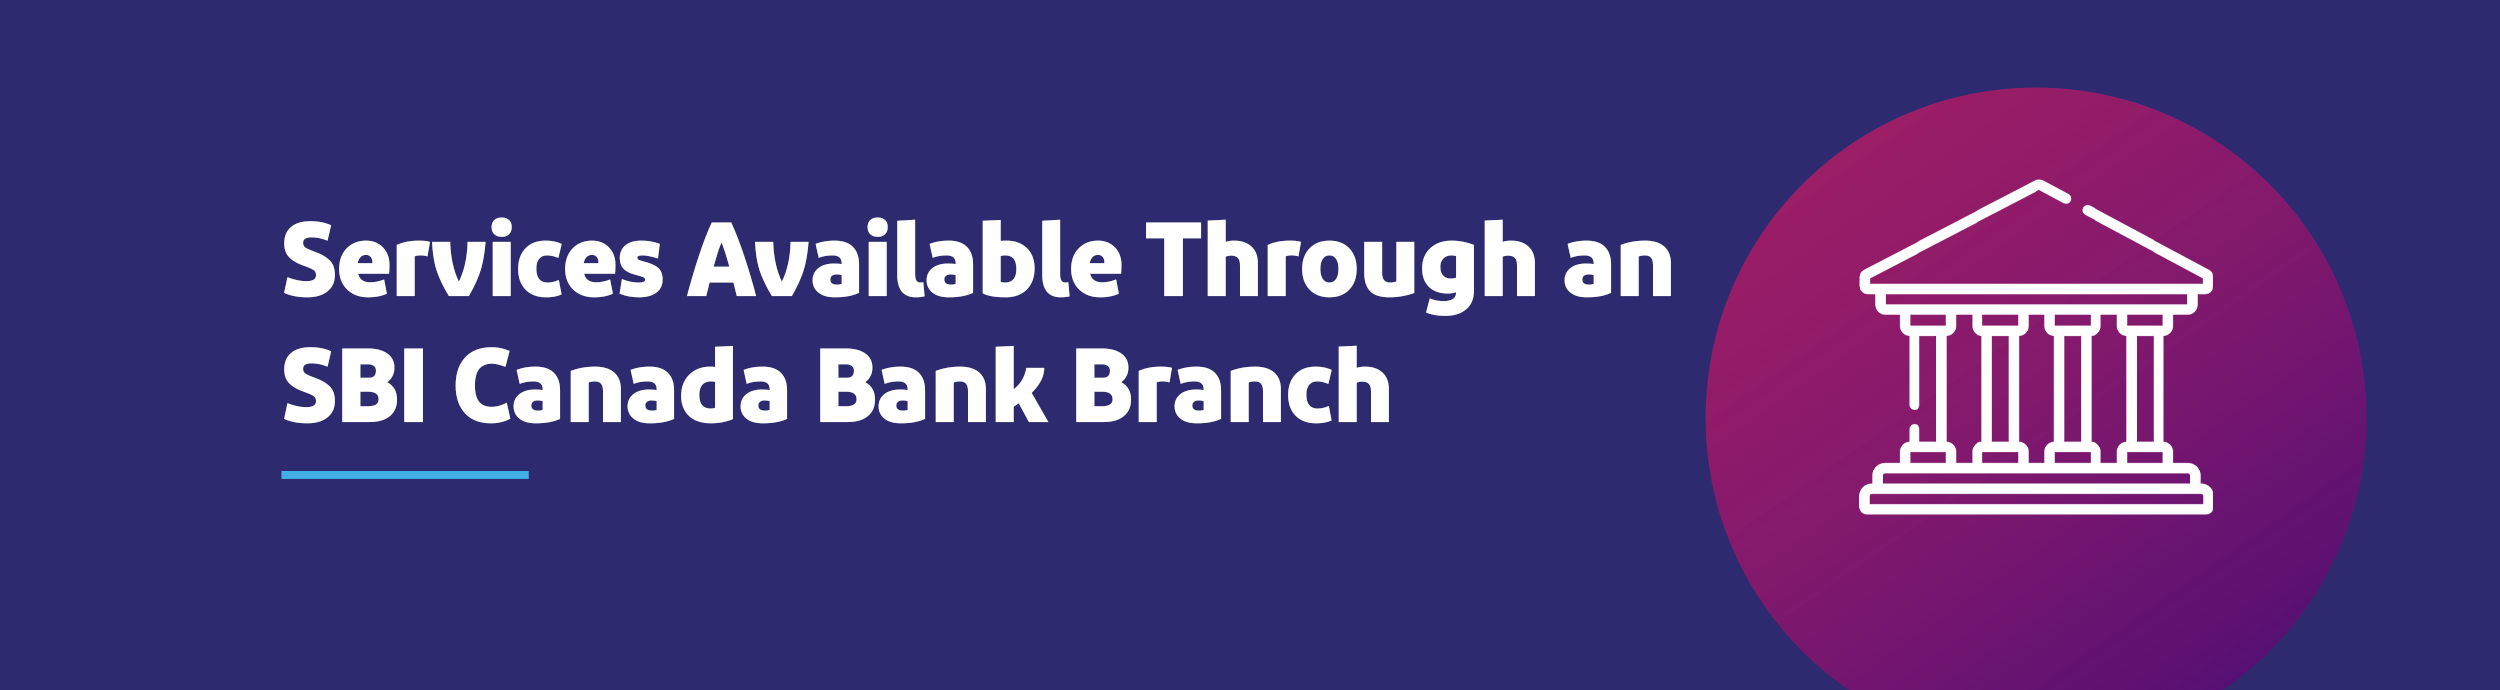 Service available through an SBI Canada bank branch banner